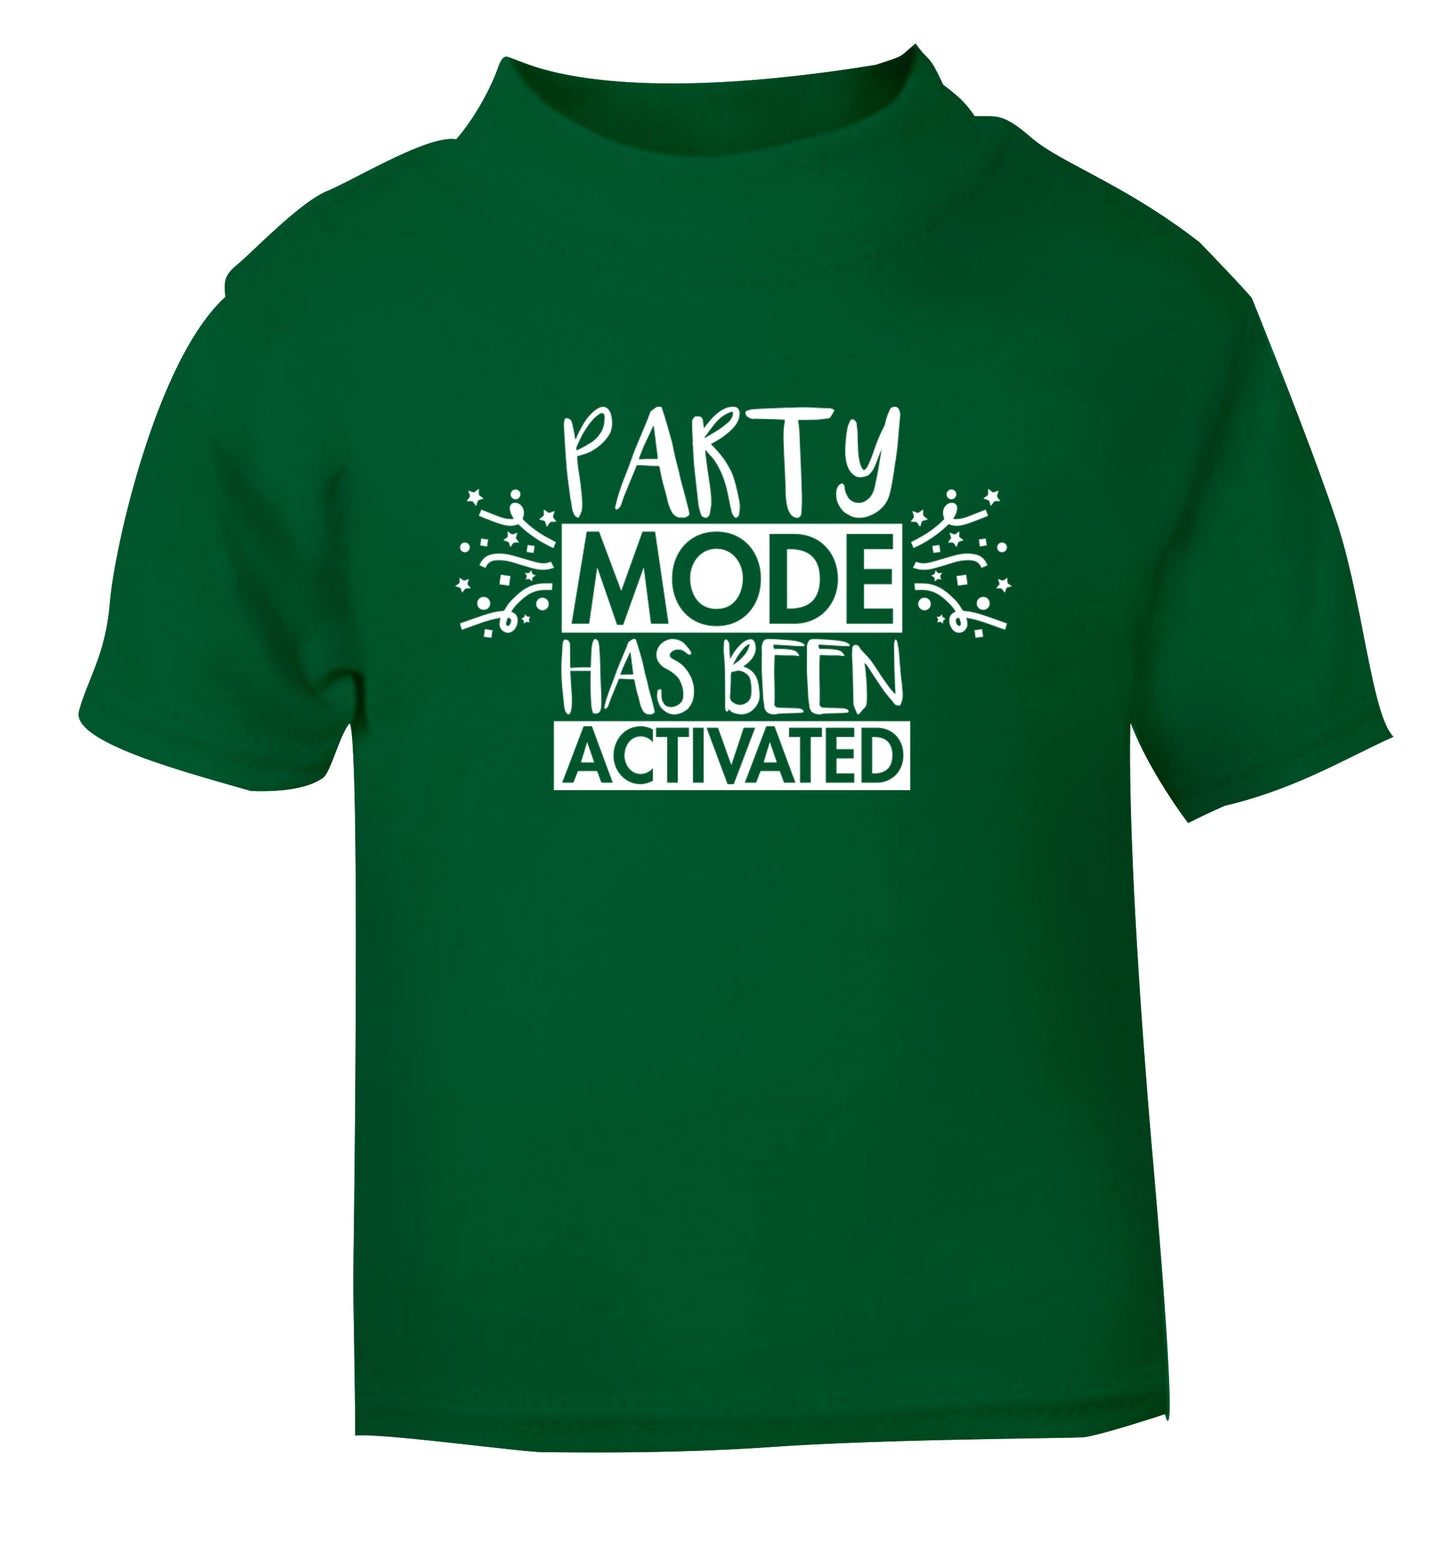 Please do not disturb party mode has been activated green Baby Toddler Tshirt 2 Years